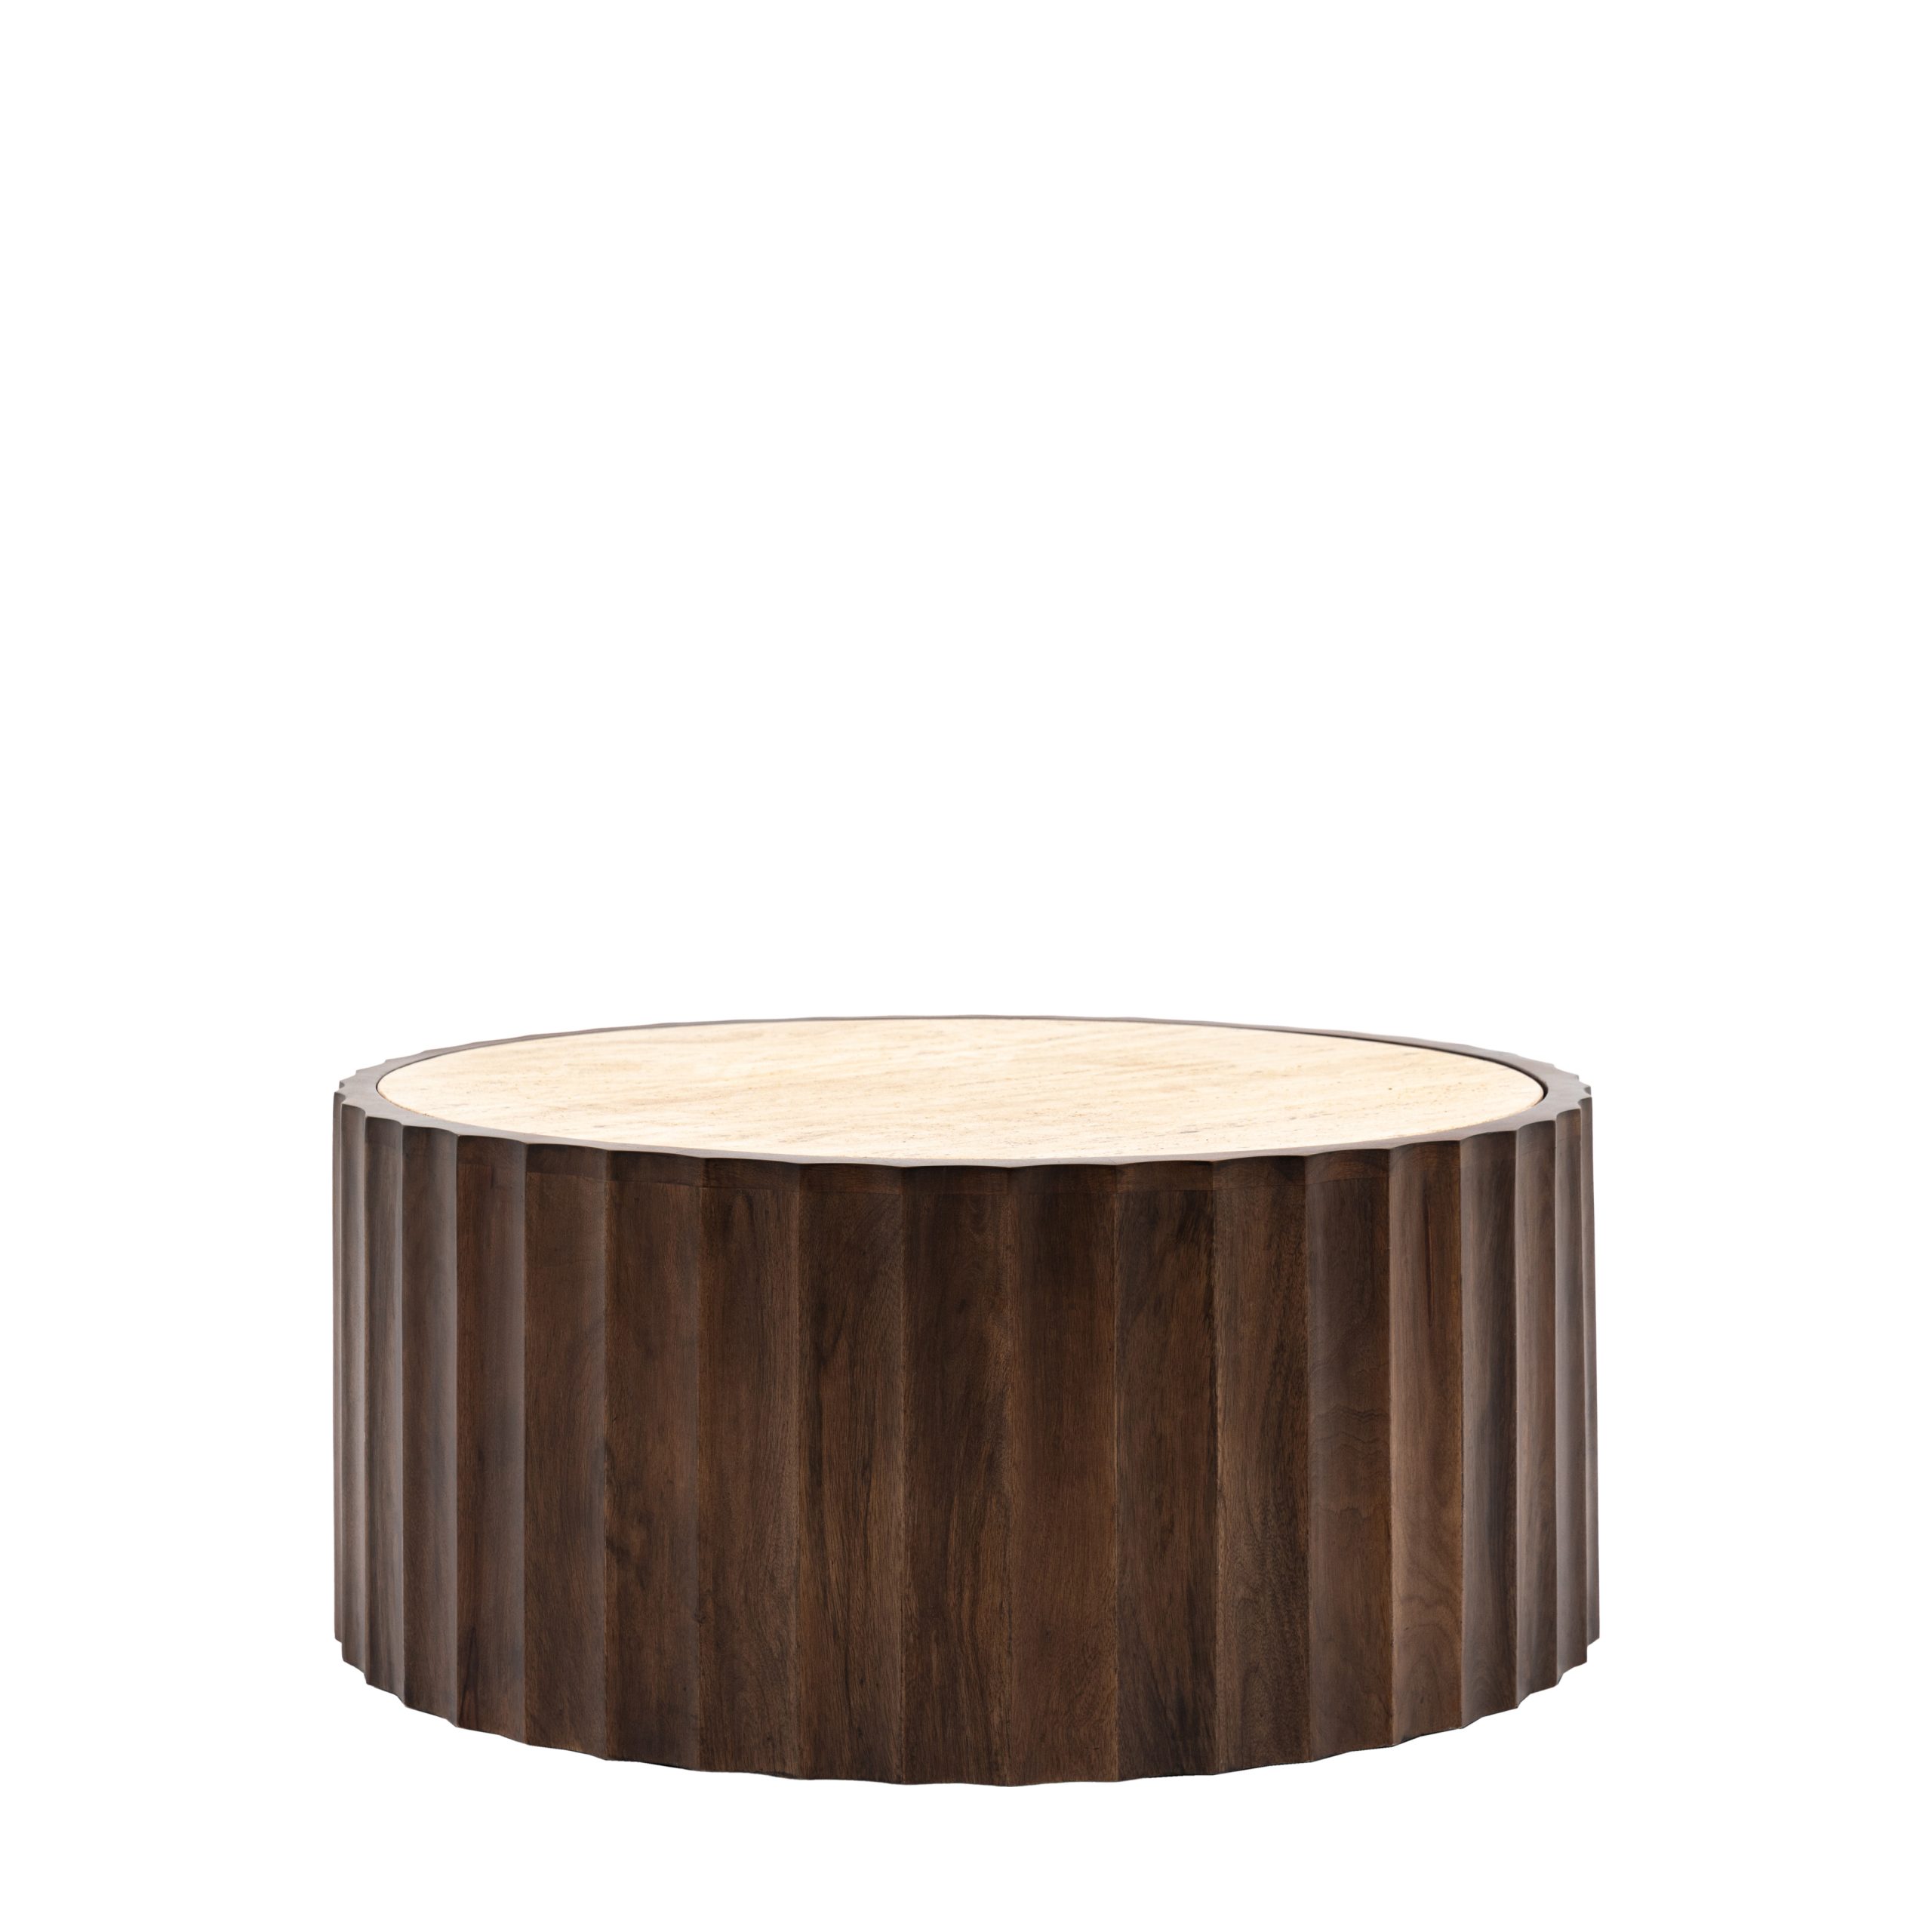 Gallery Direct Cascia Coffee Table | Shackletons